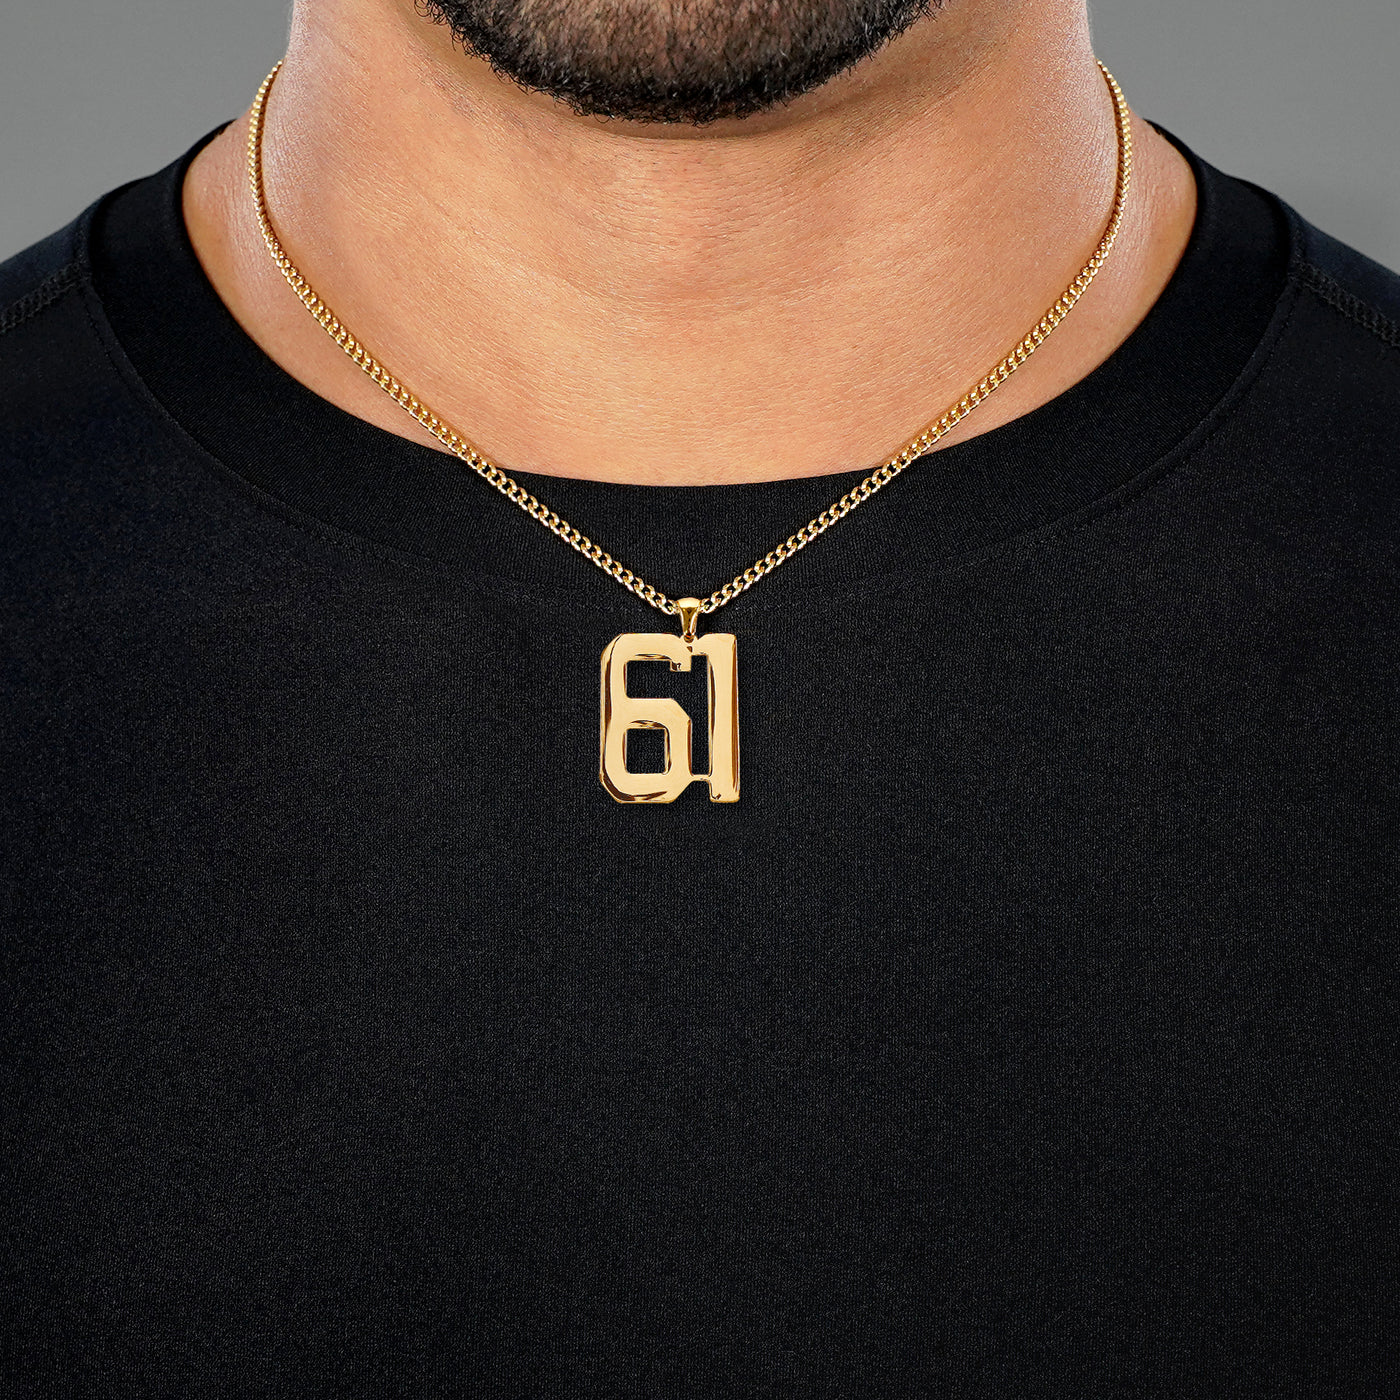 61 Number Pendant with Chain Necklace - Gold Plated Stainless Steel